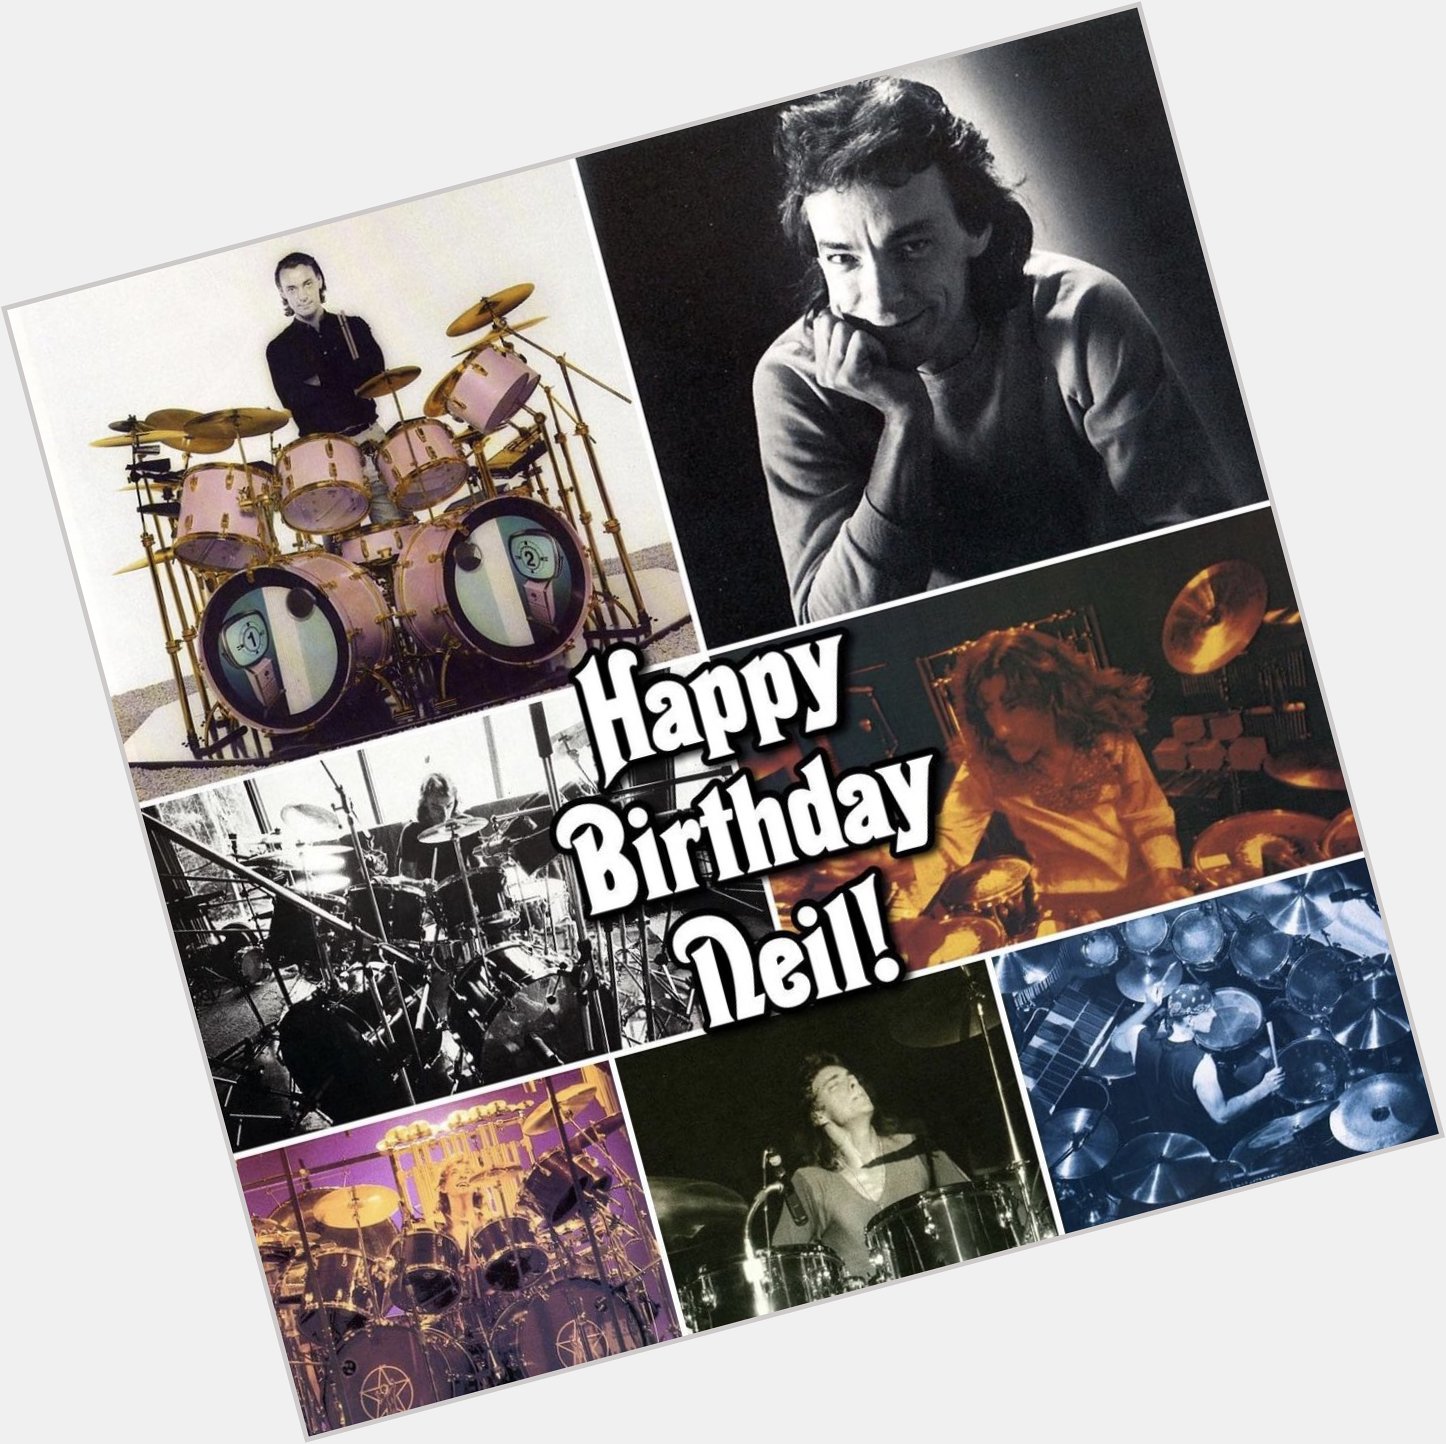 Wishing a very Happy Birthday to The Professor, Neil Peart! 